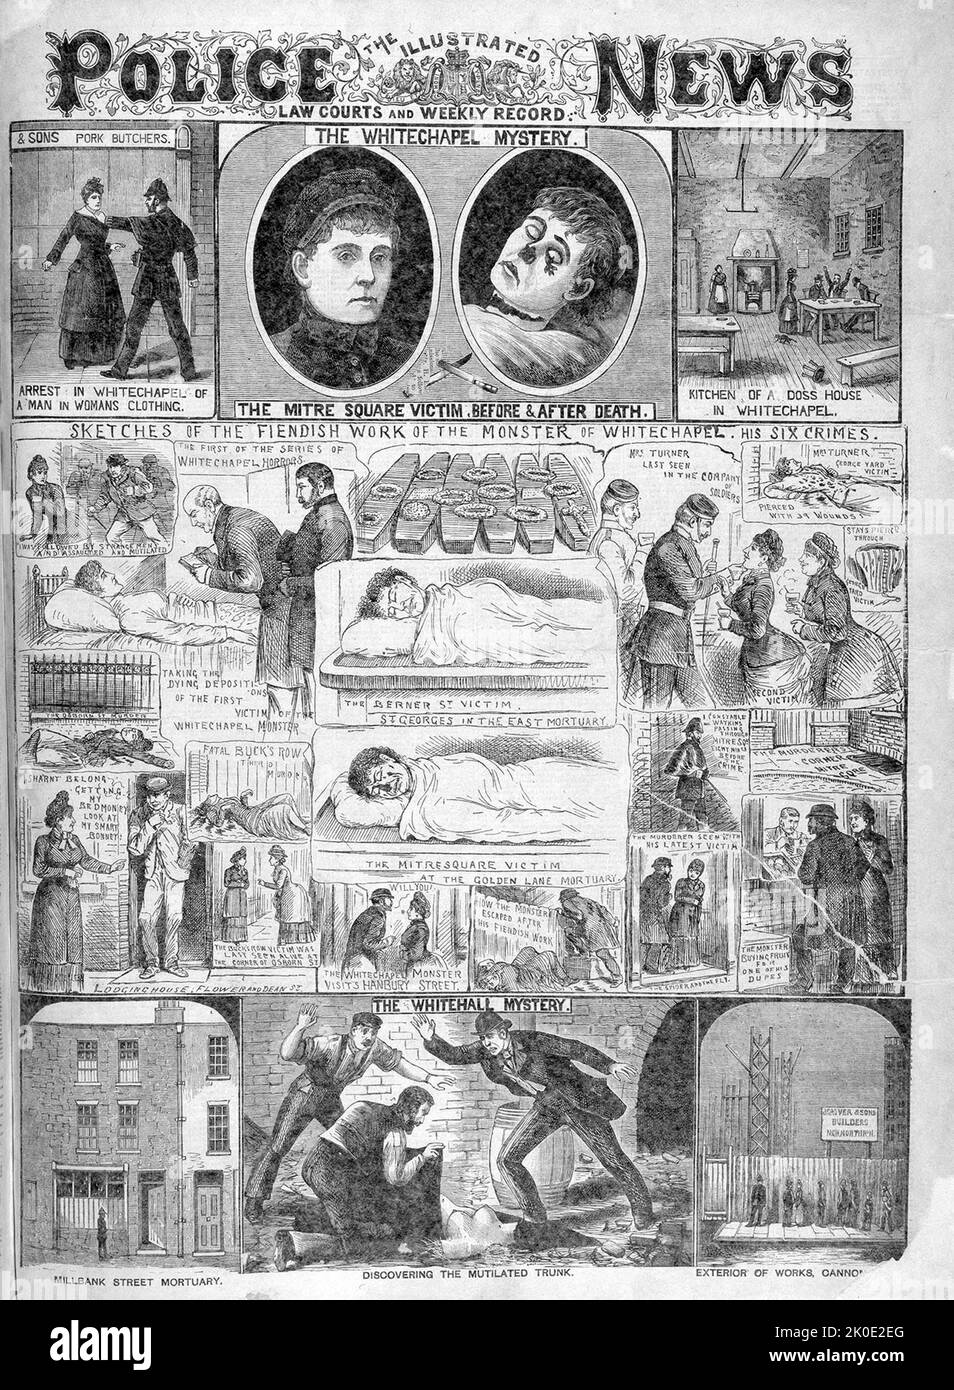 Newspaper report of 1888 about the notorious unidentified serial killer known as Jack the Ripper, who is believed to have killed and mutilated a minimum of five women in the Whitechapel and Spitalfields districts of London from late August to early November 1888. Stock Photo